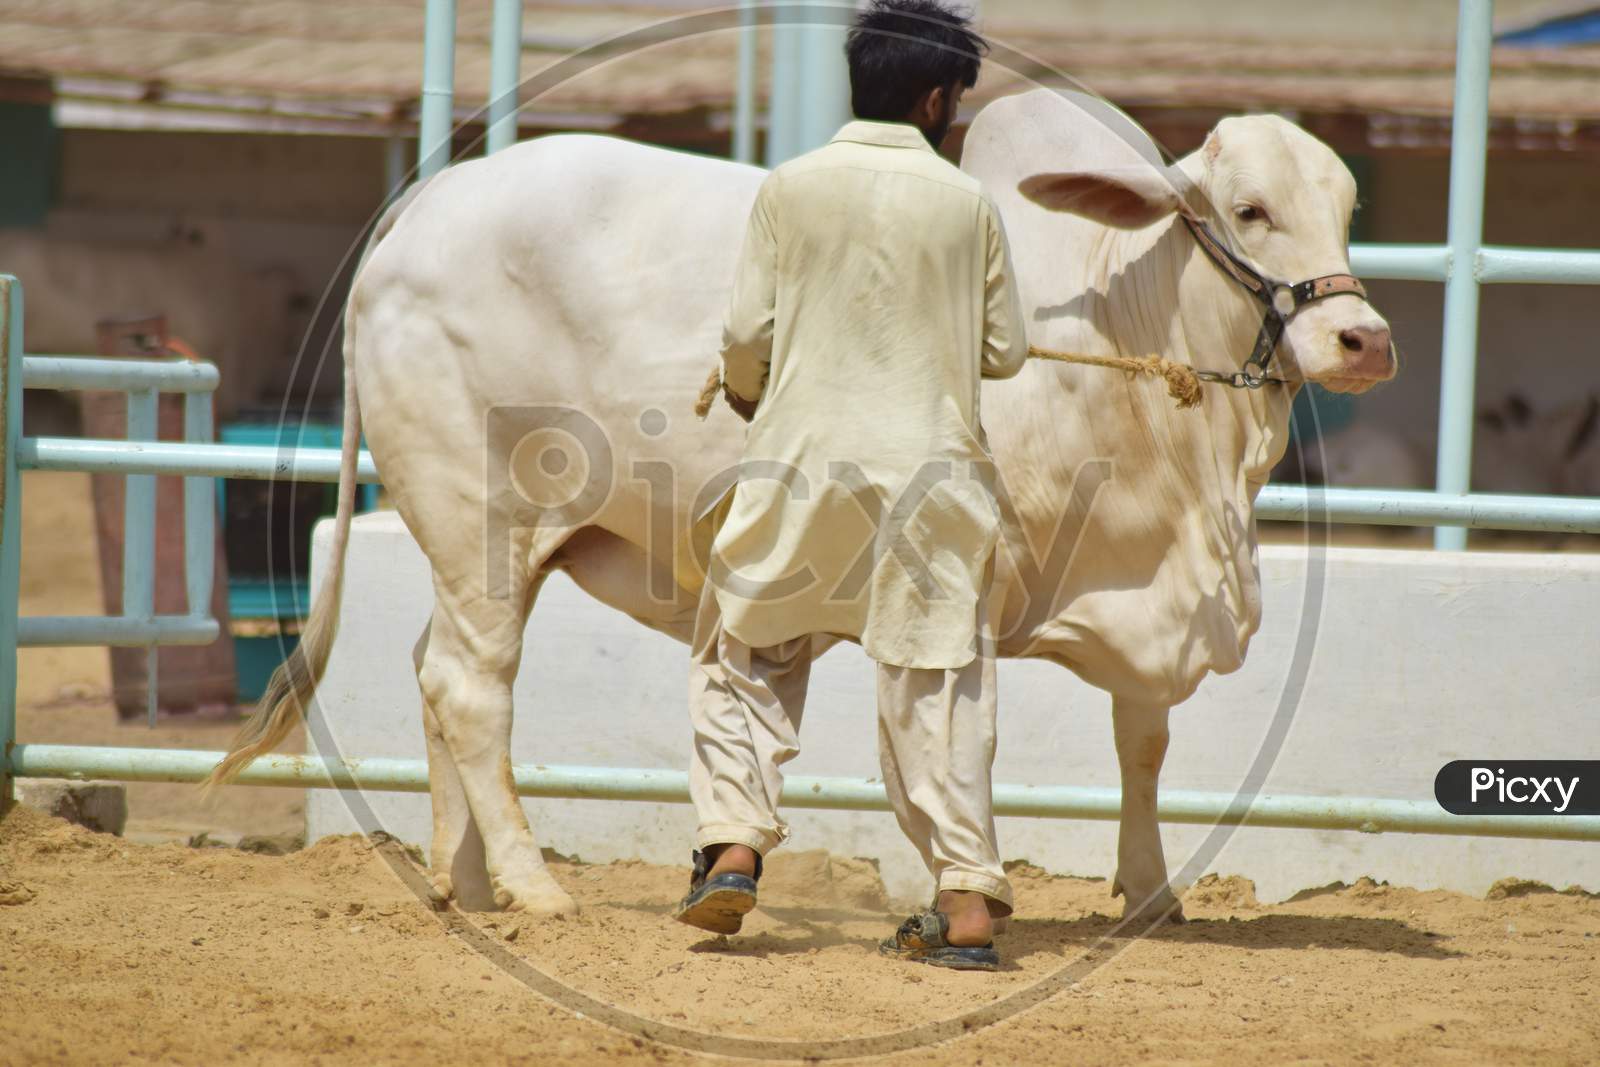 A Man with White Bull in Cattle Farm